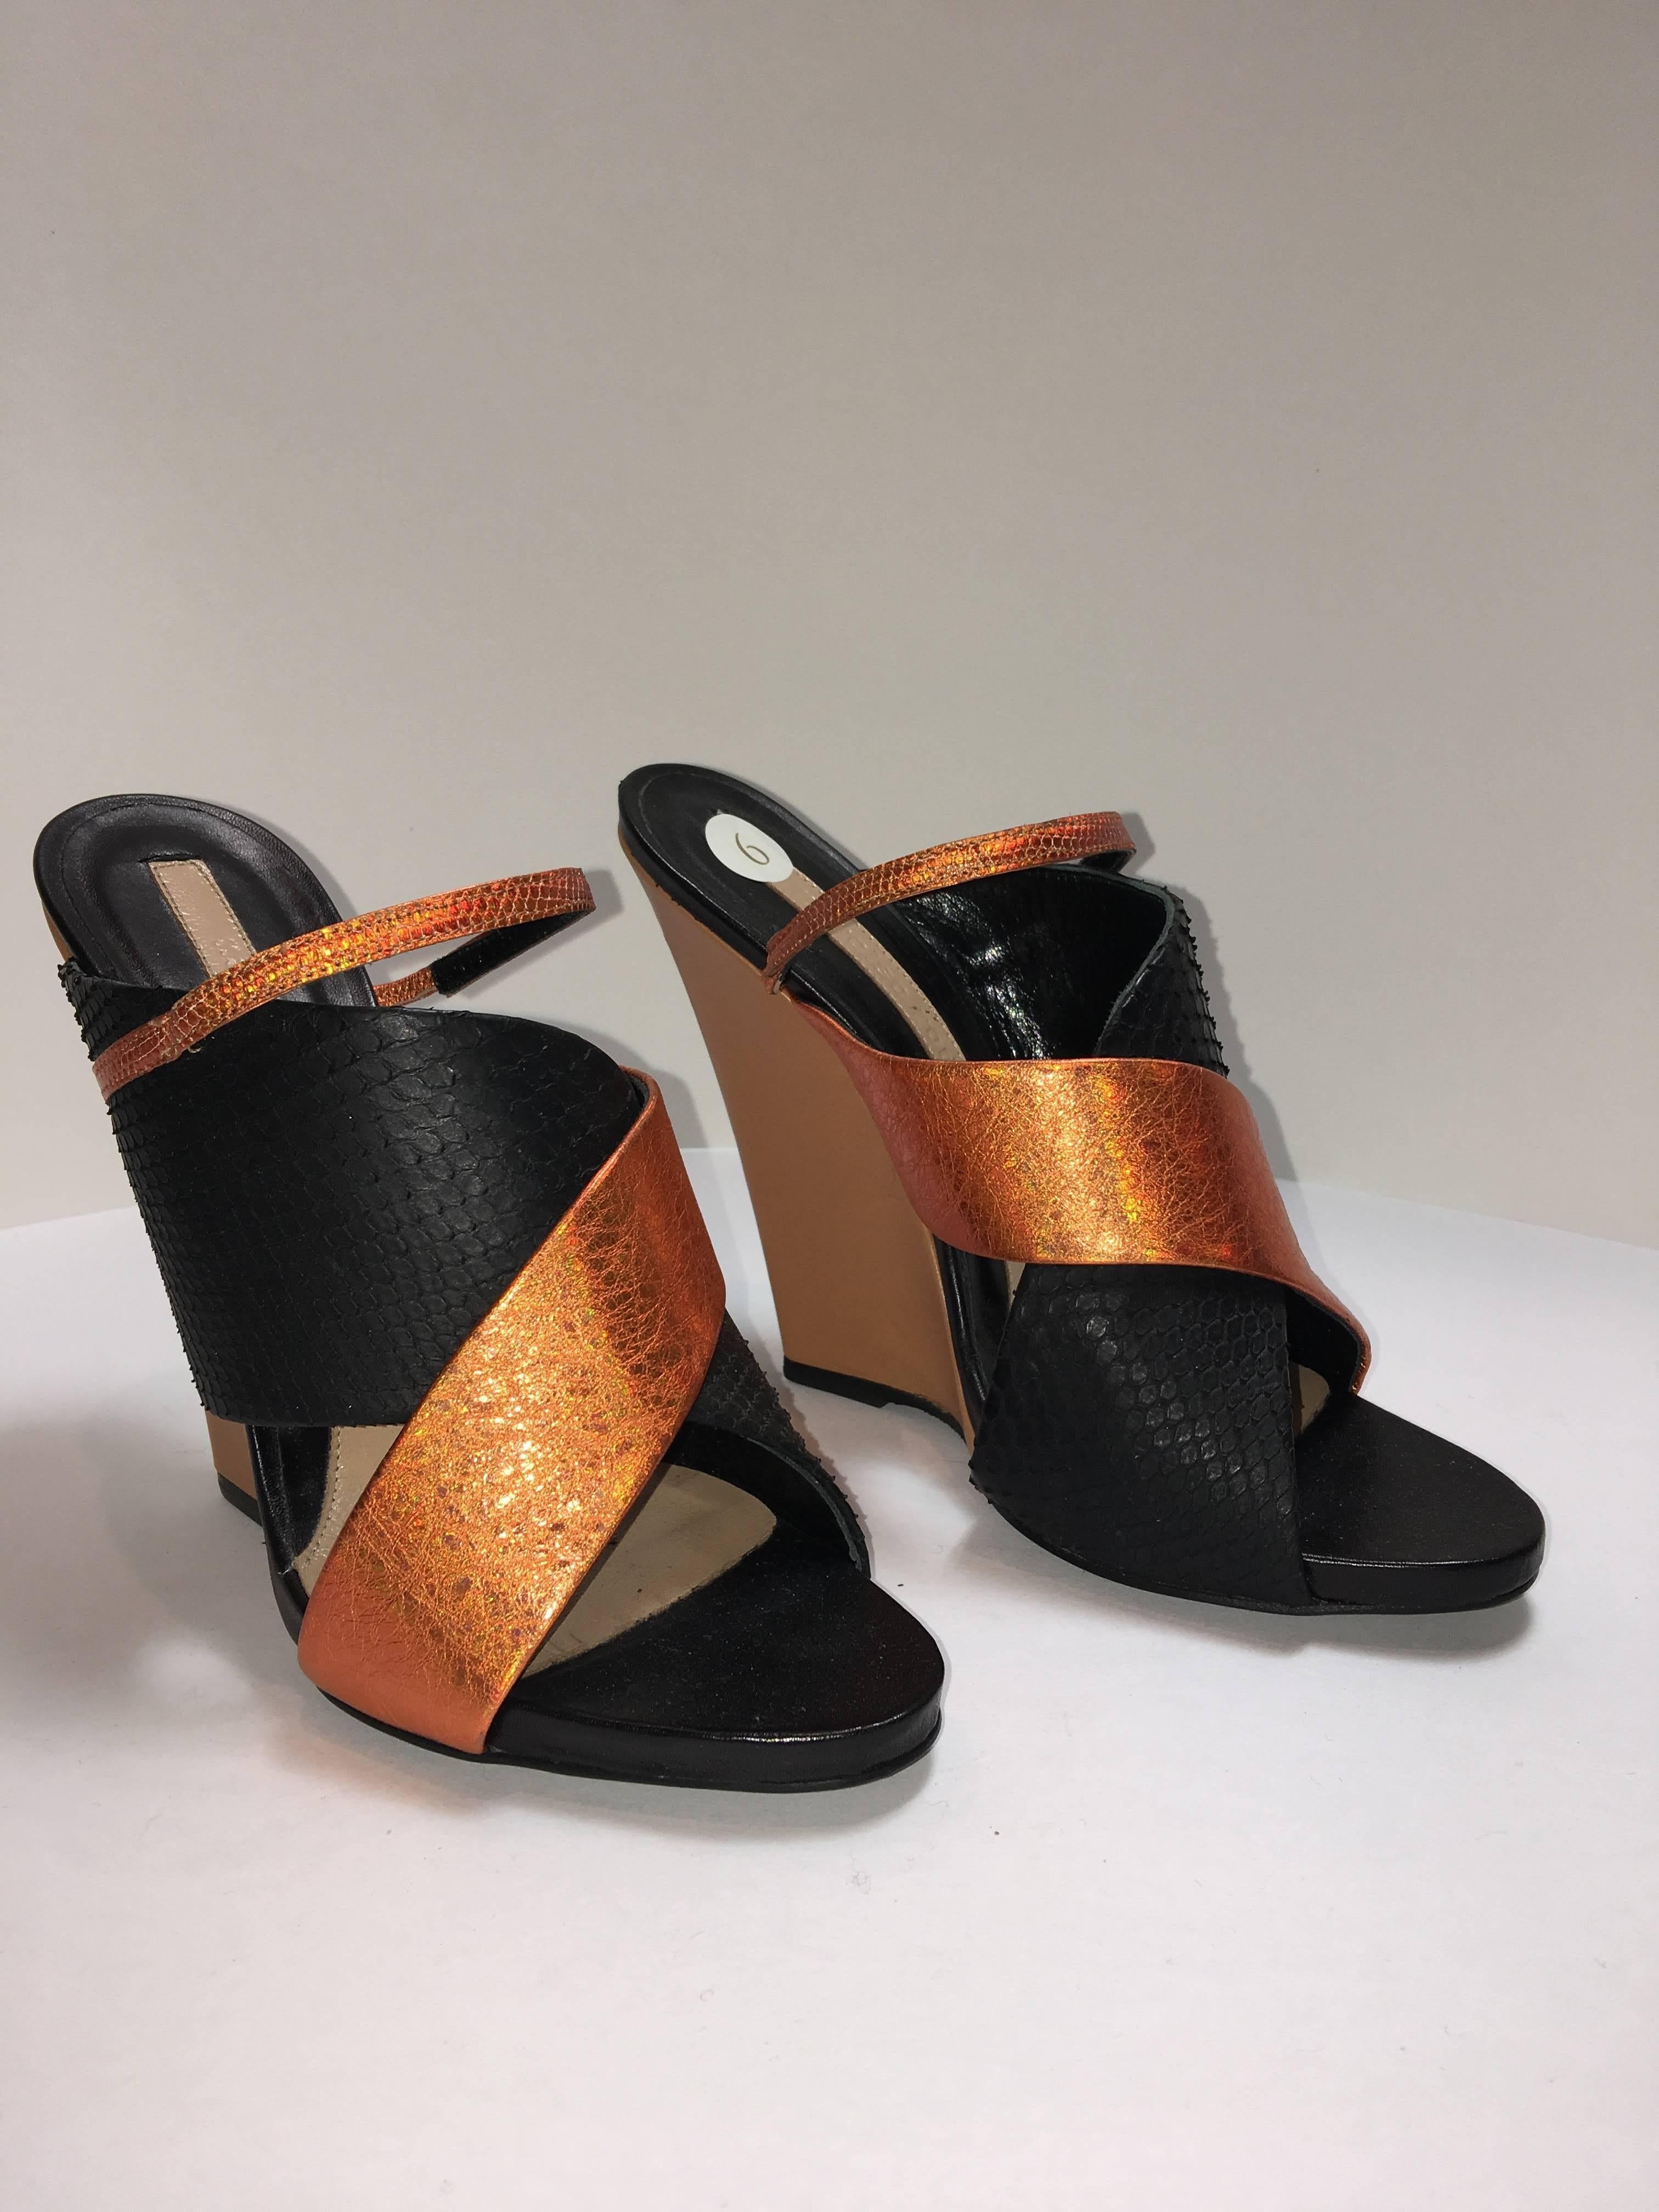 Criss-Cross strap wedges with contrasting metallic and snake print design. Two thick straps with a complimenting third narrow strap. 